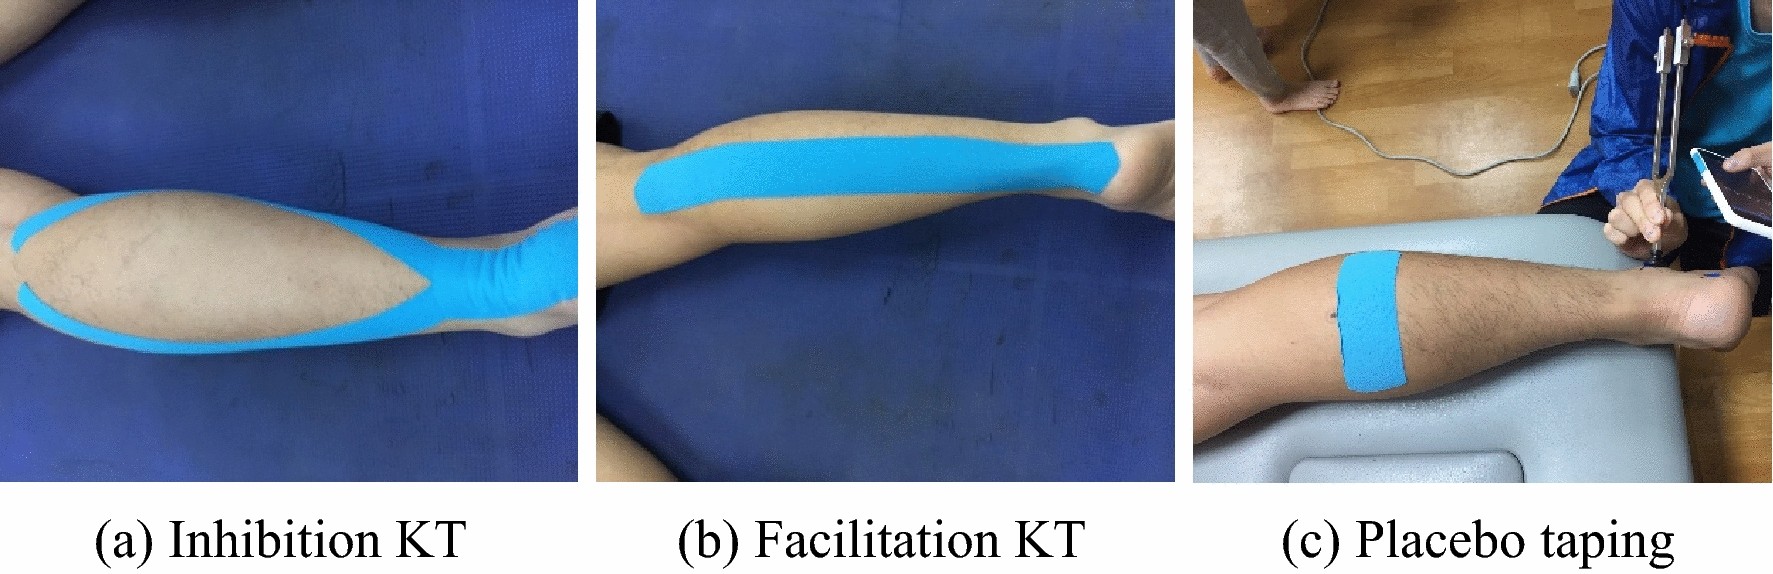 Effects Of The Direction Of Kinesio Taping On Sensation And Postural  Control Before And After Muscle Fatigue In Healthy Athletes | Scientific  Reports